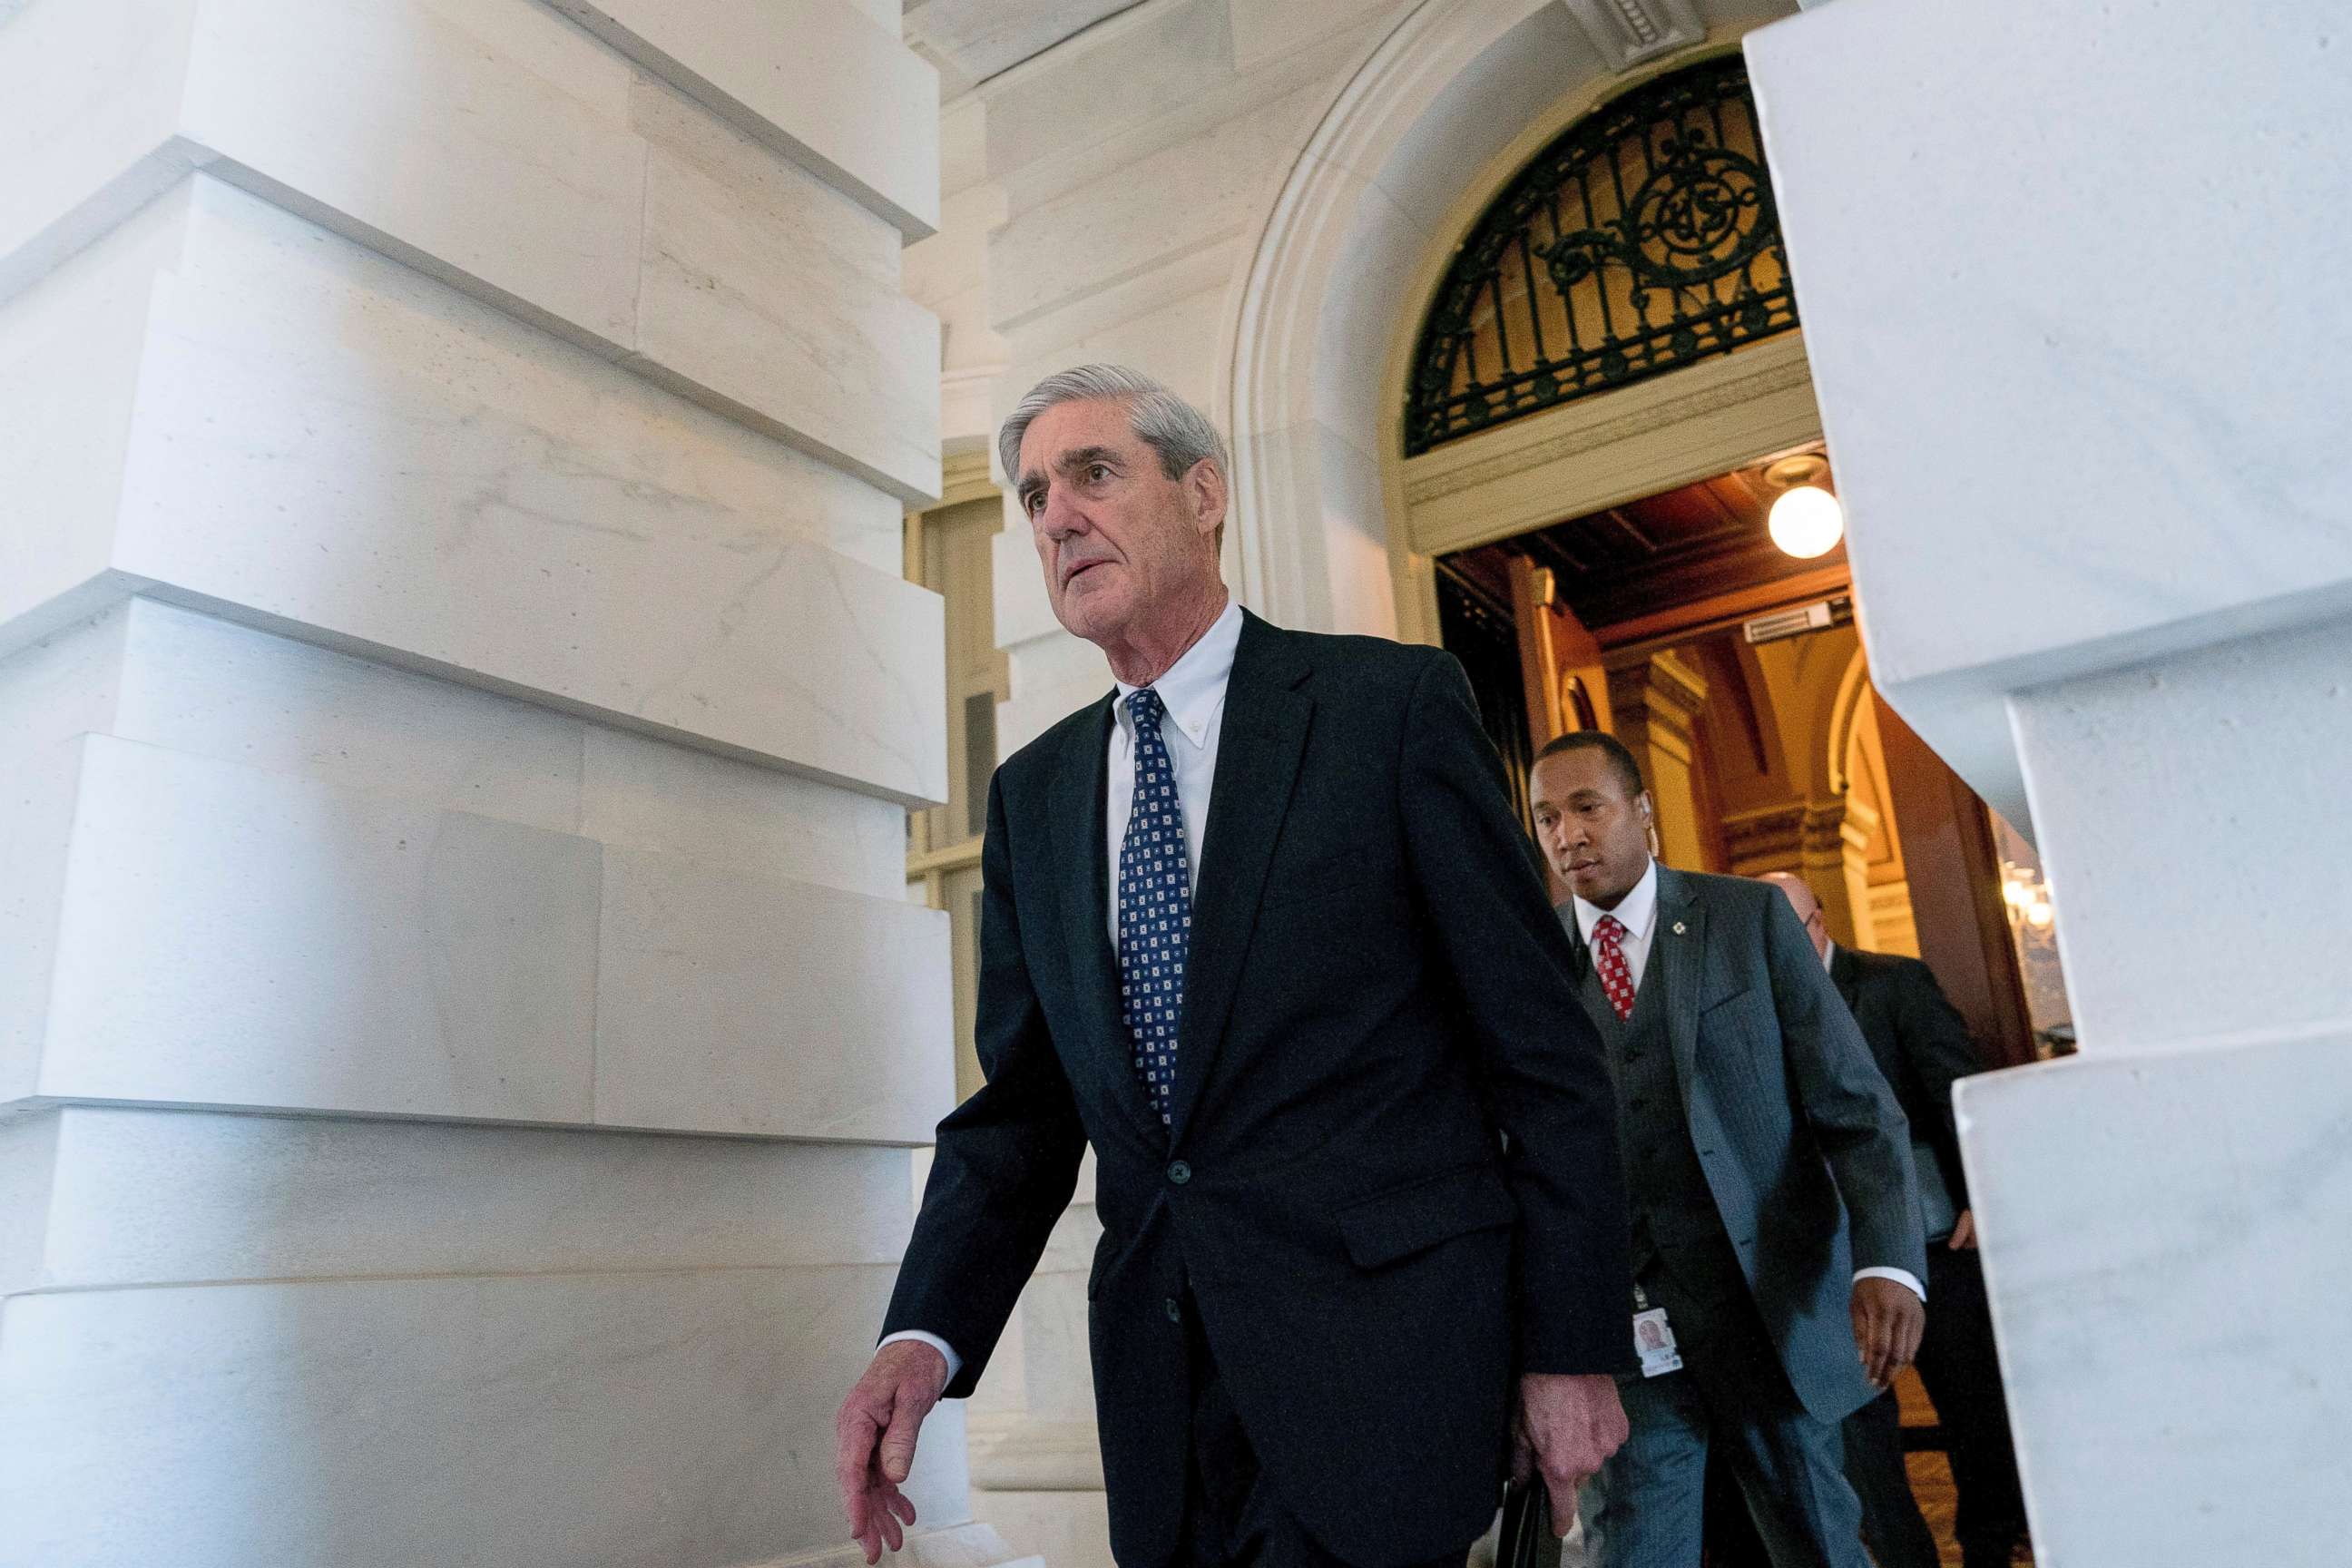 PHOTO: Special Counsel Robert Mueller departs Capitol Hill following a closed door meeting in Washington in this June 21, 2017 file photo.